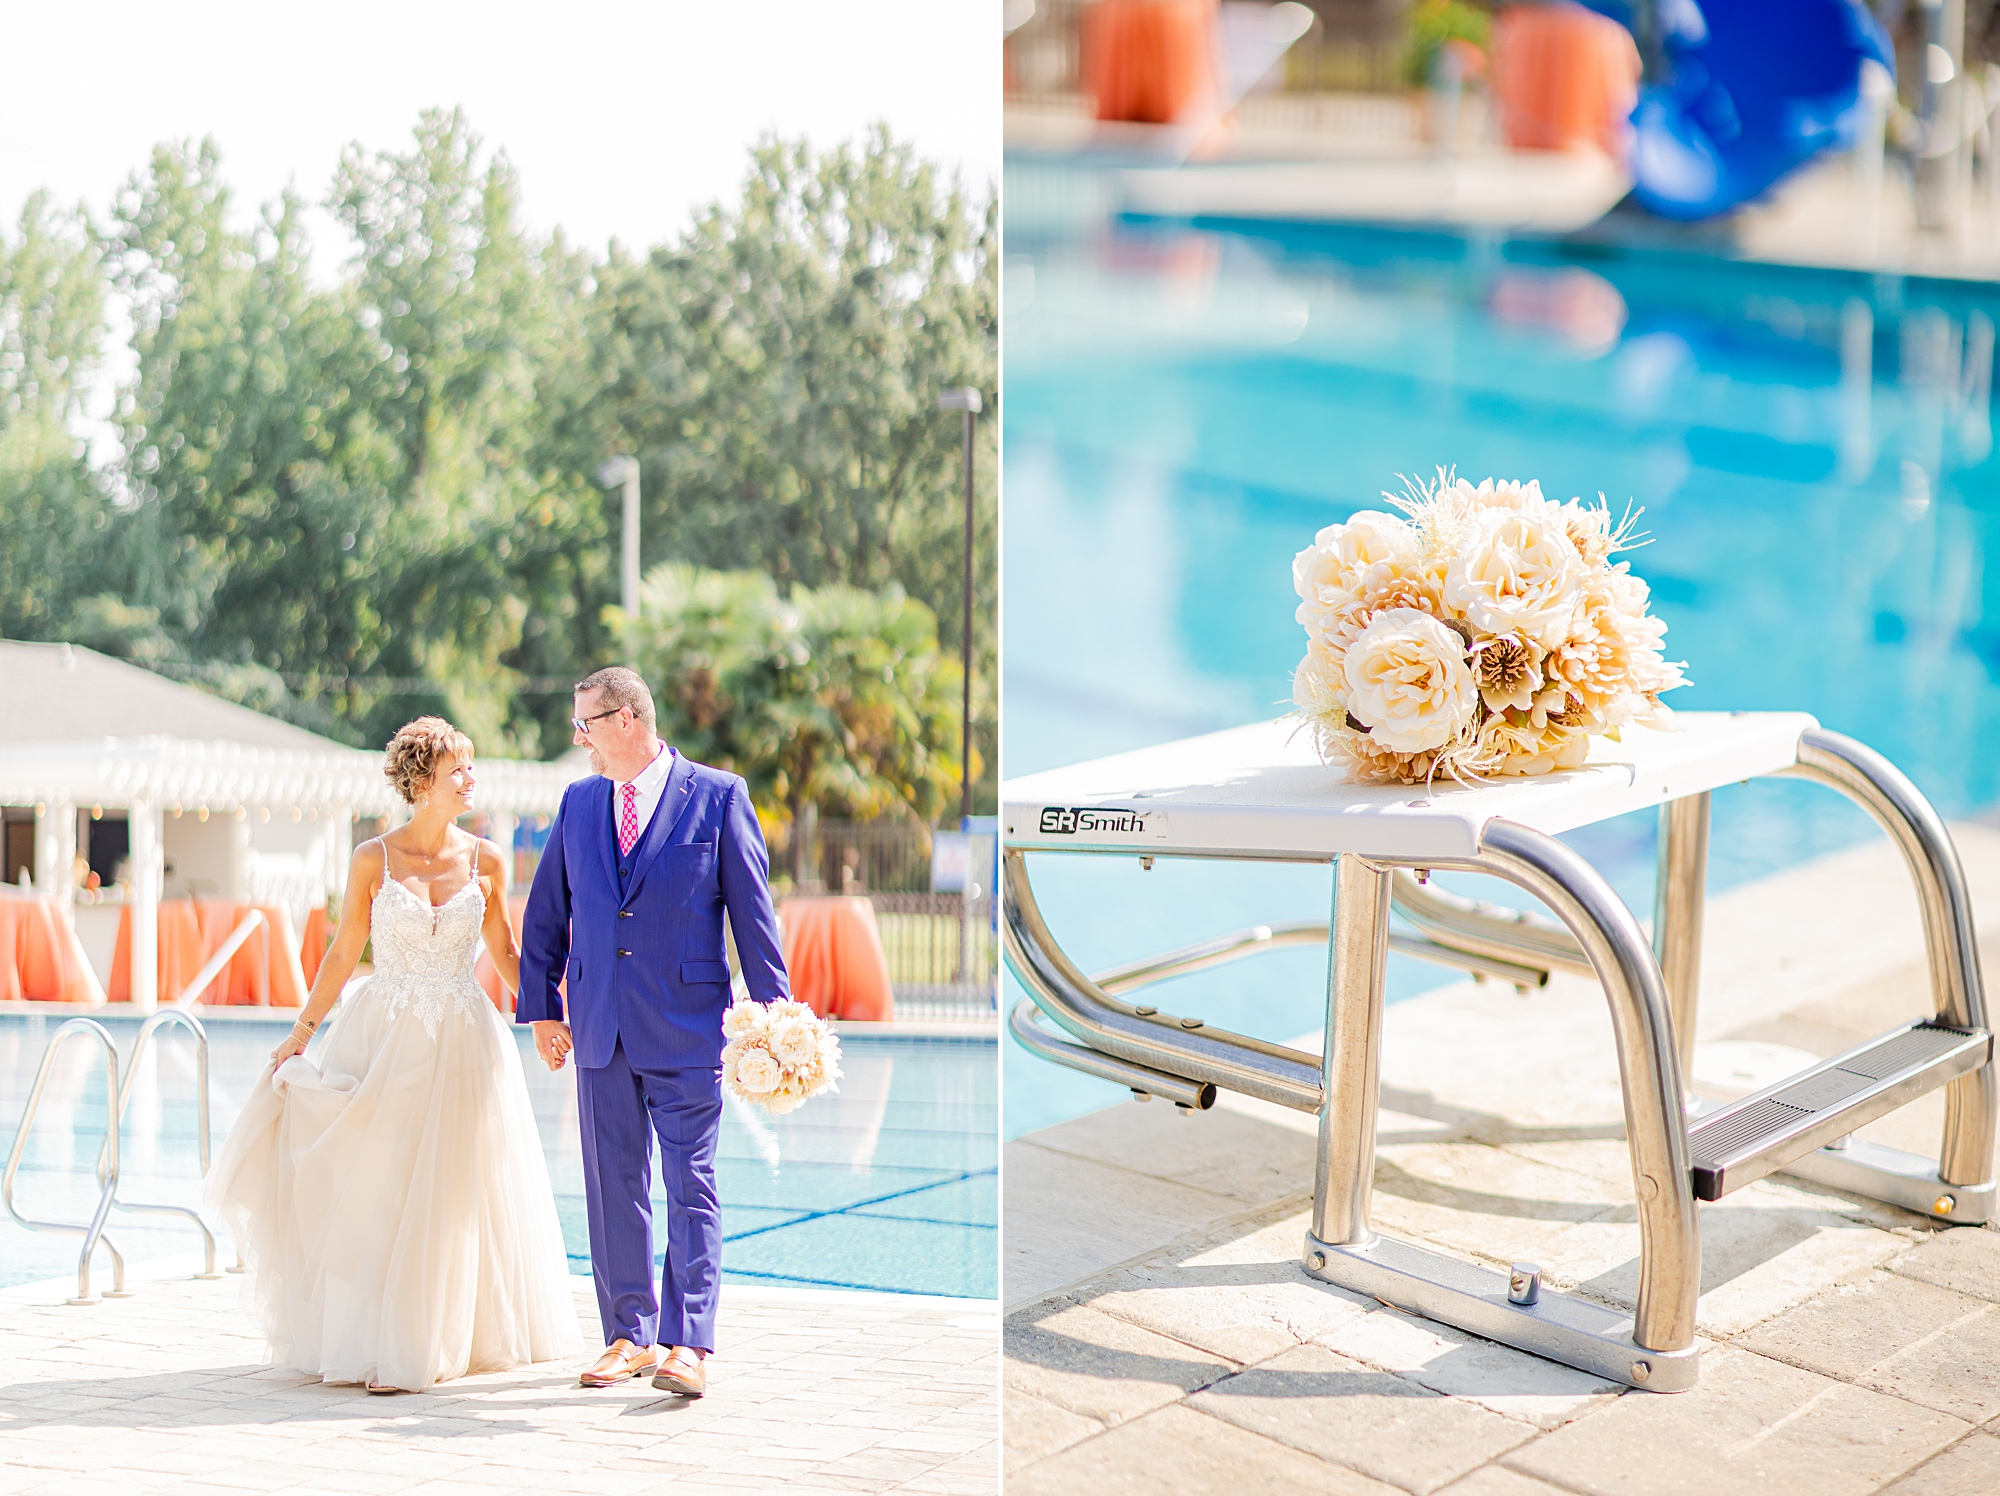 newlyweds walk beside pool at Starclaire Recreation Club with bride's bouquet on diving board